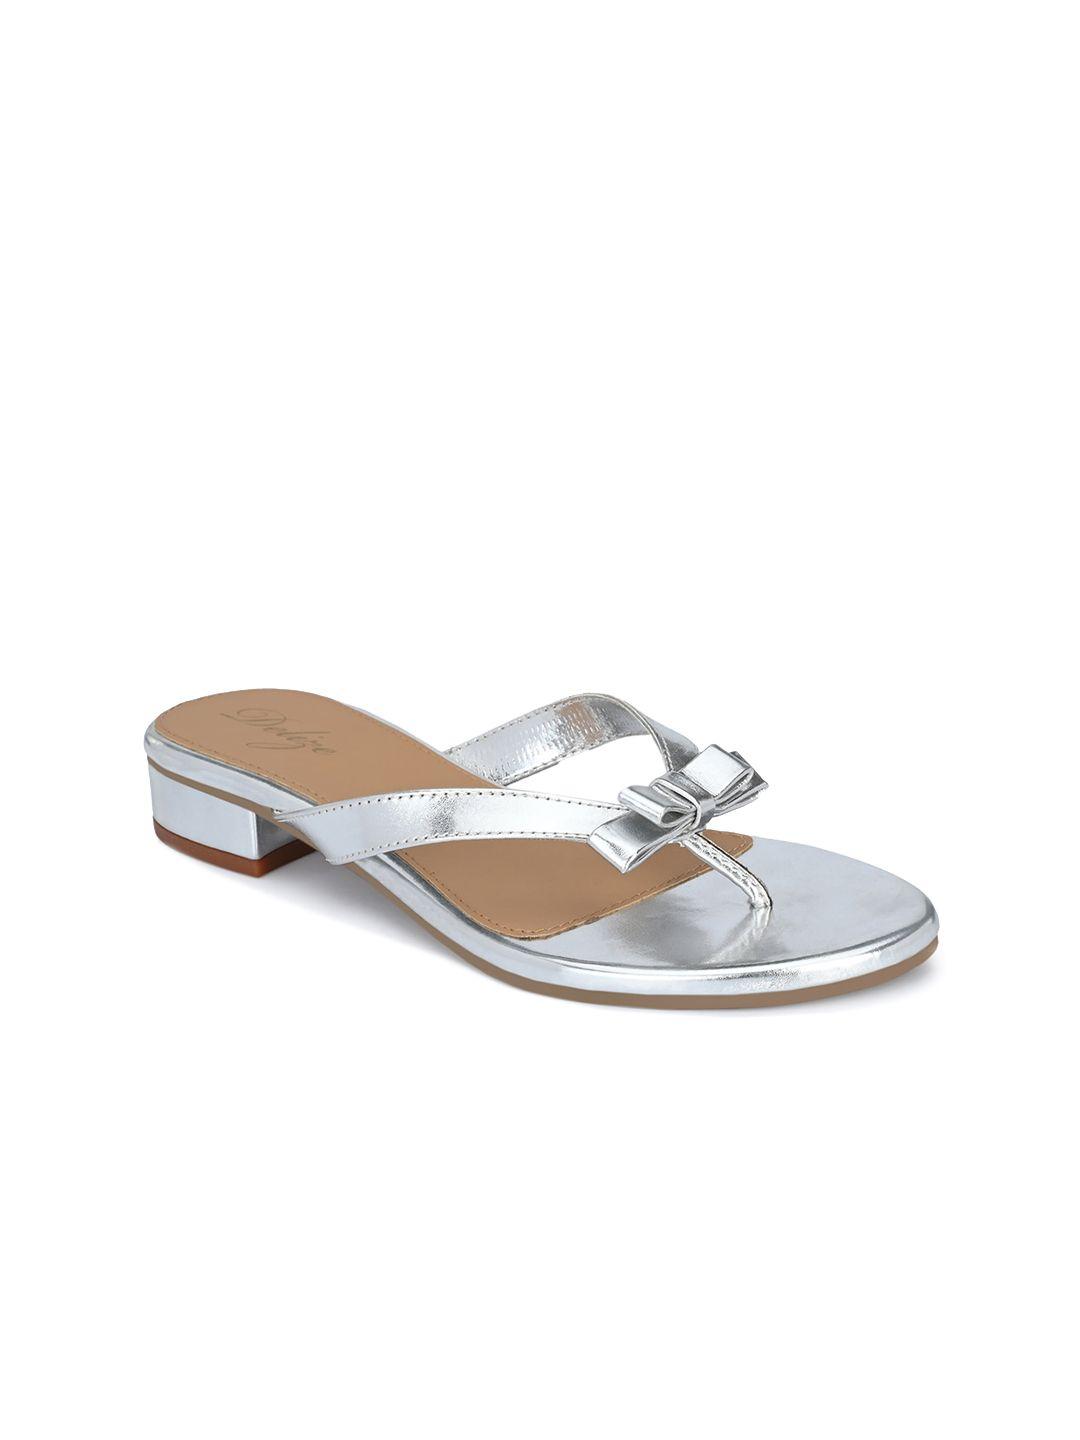 delize-women-silver-toned-t-strap-flats-with-bows